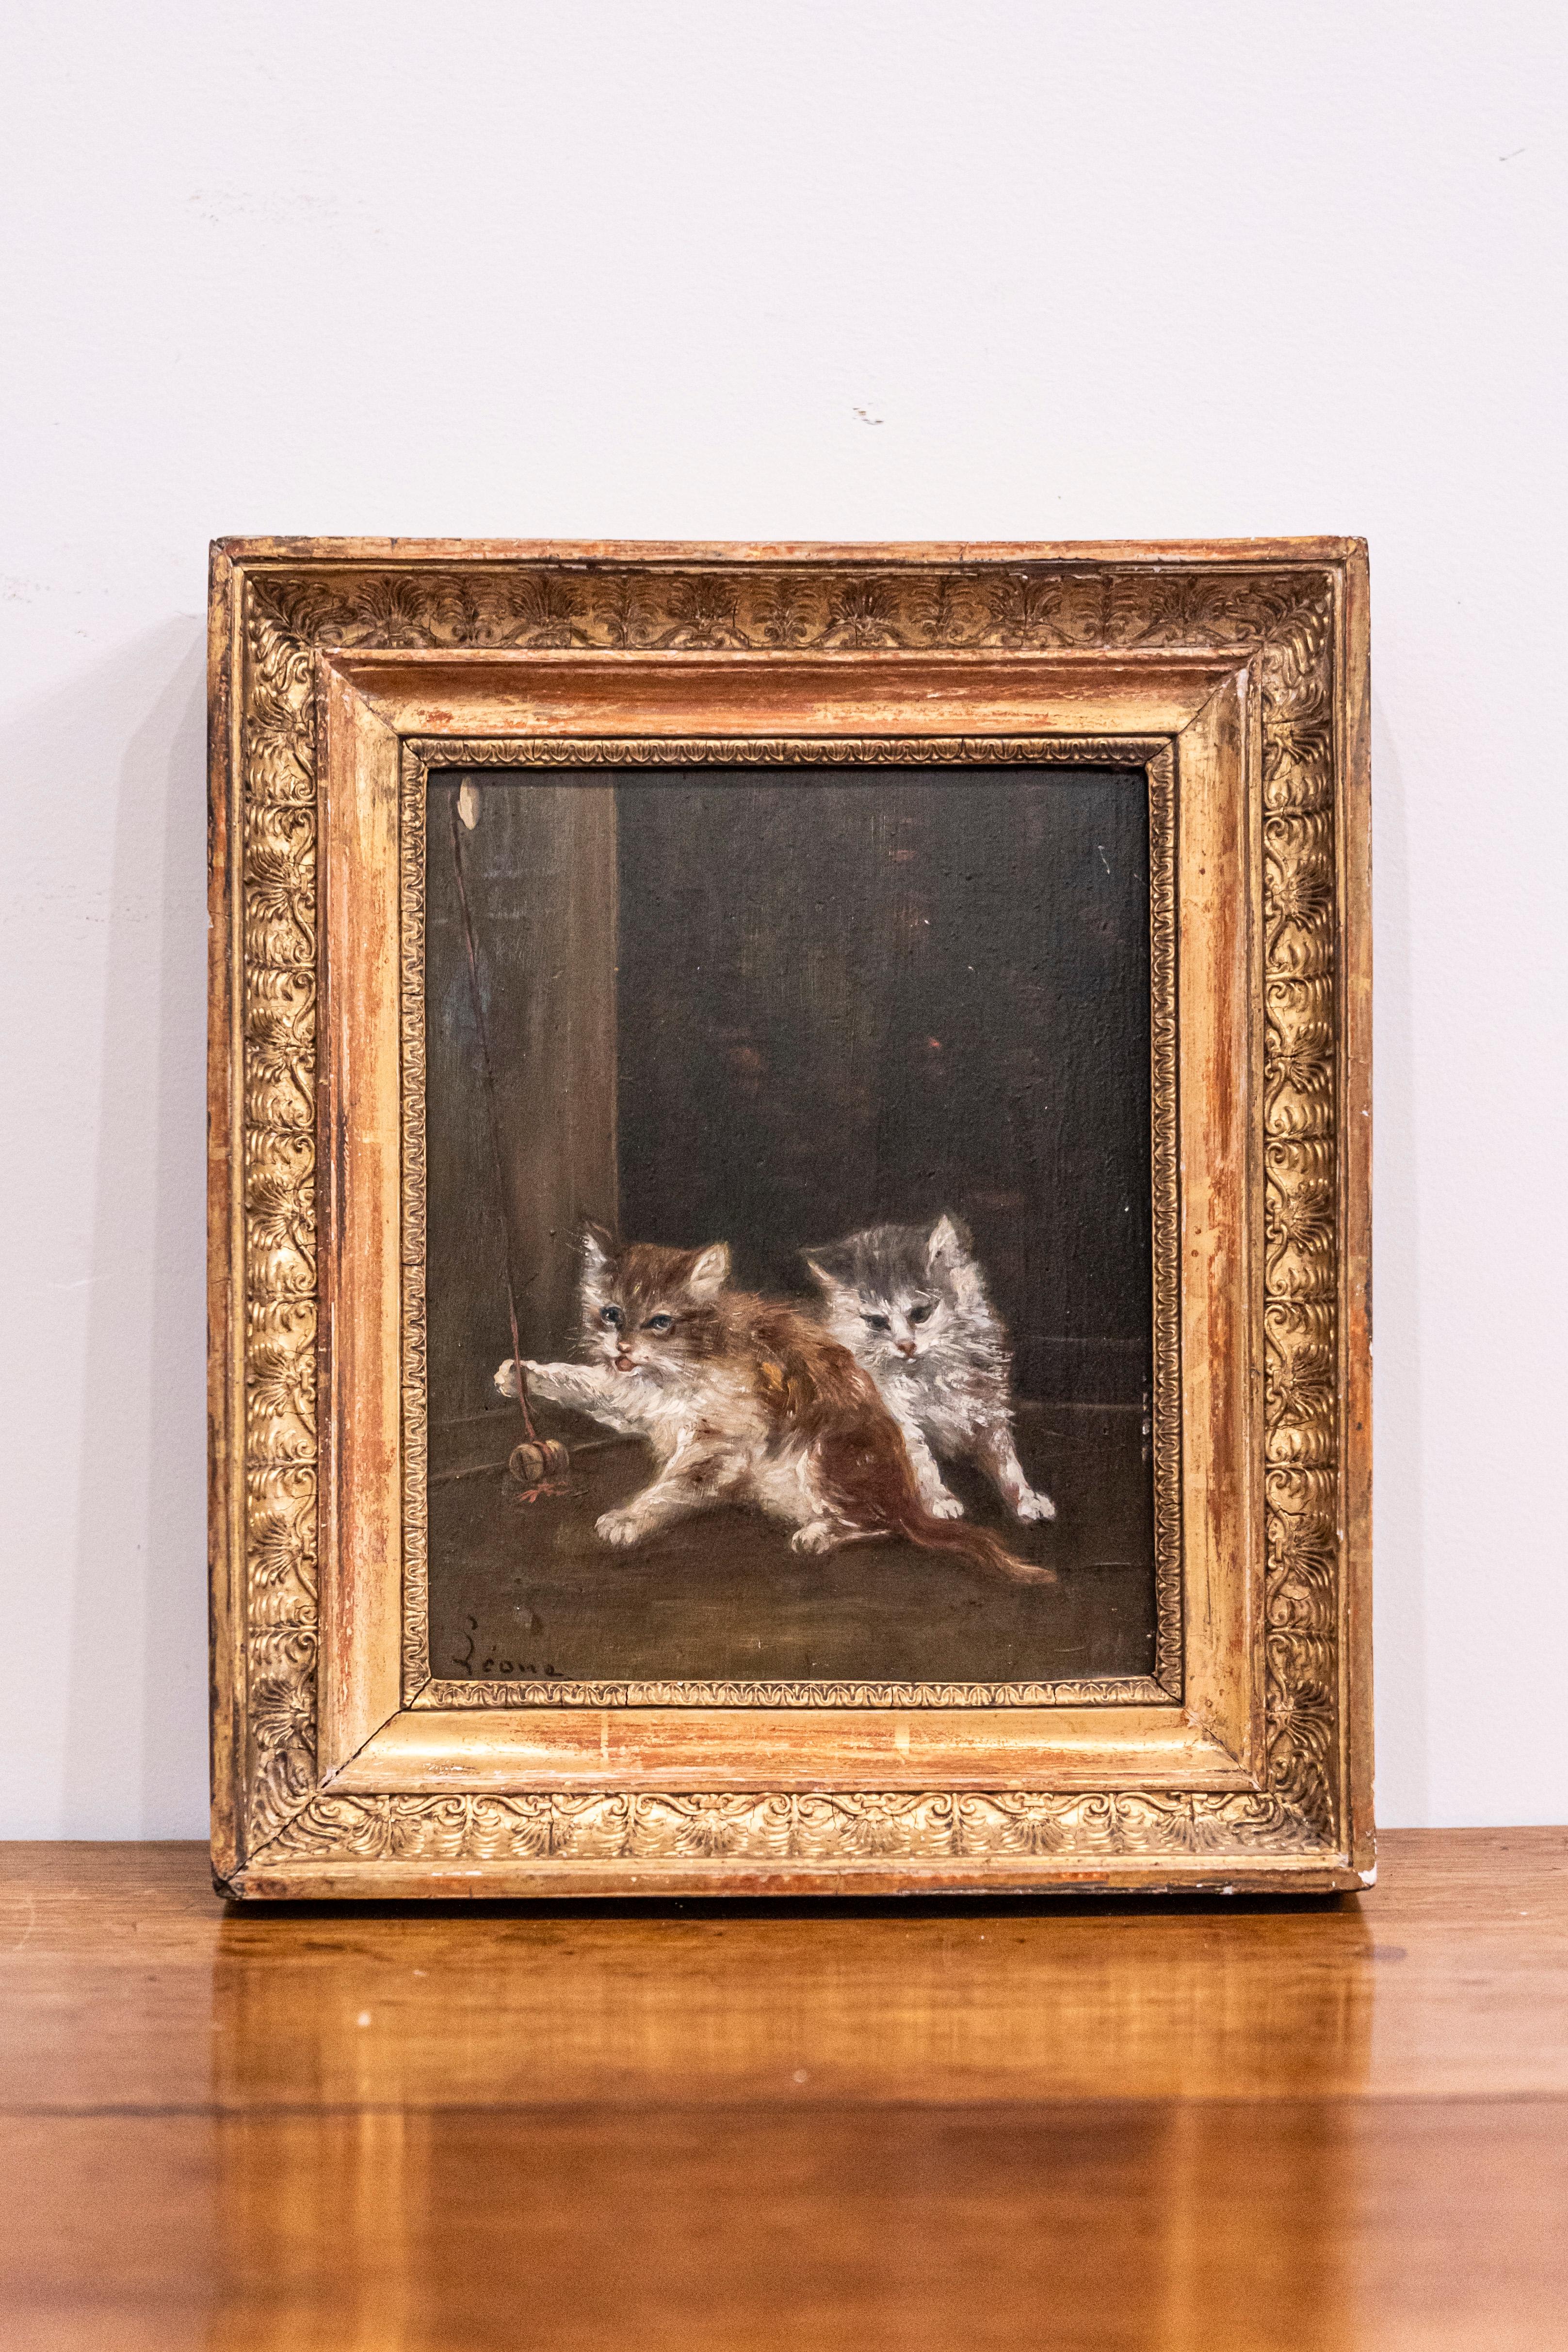 A French oil on canvas animal painting signed Laroche from the late 19th century with giltwood frame. This French oil on canvas painting features two lovely kittens playing with a stringed cork. Placed on a dark background that brings up the color